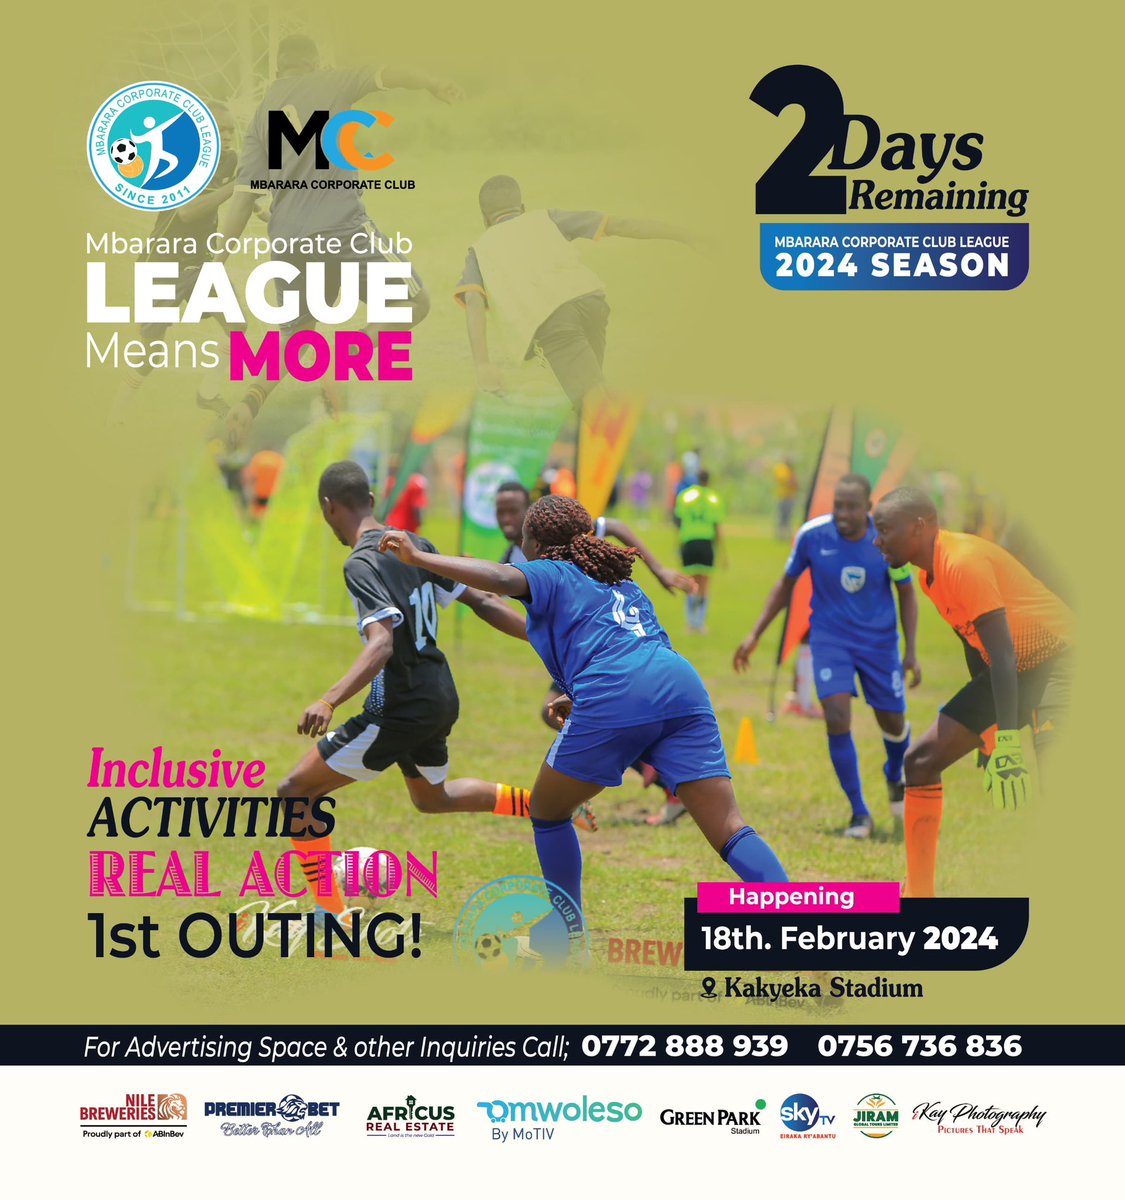 The 1st outing of 2024 is here guys with lots of exciting activities  to mention but a few..
Don’t miss out 
#NBLMCCSeason24